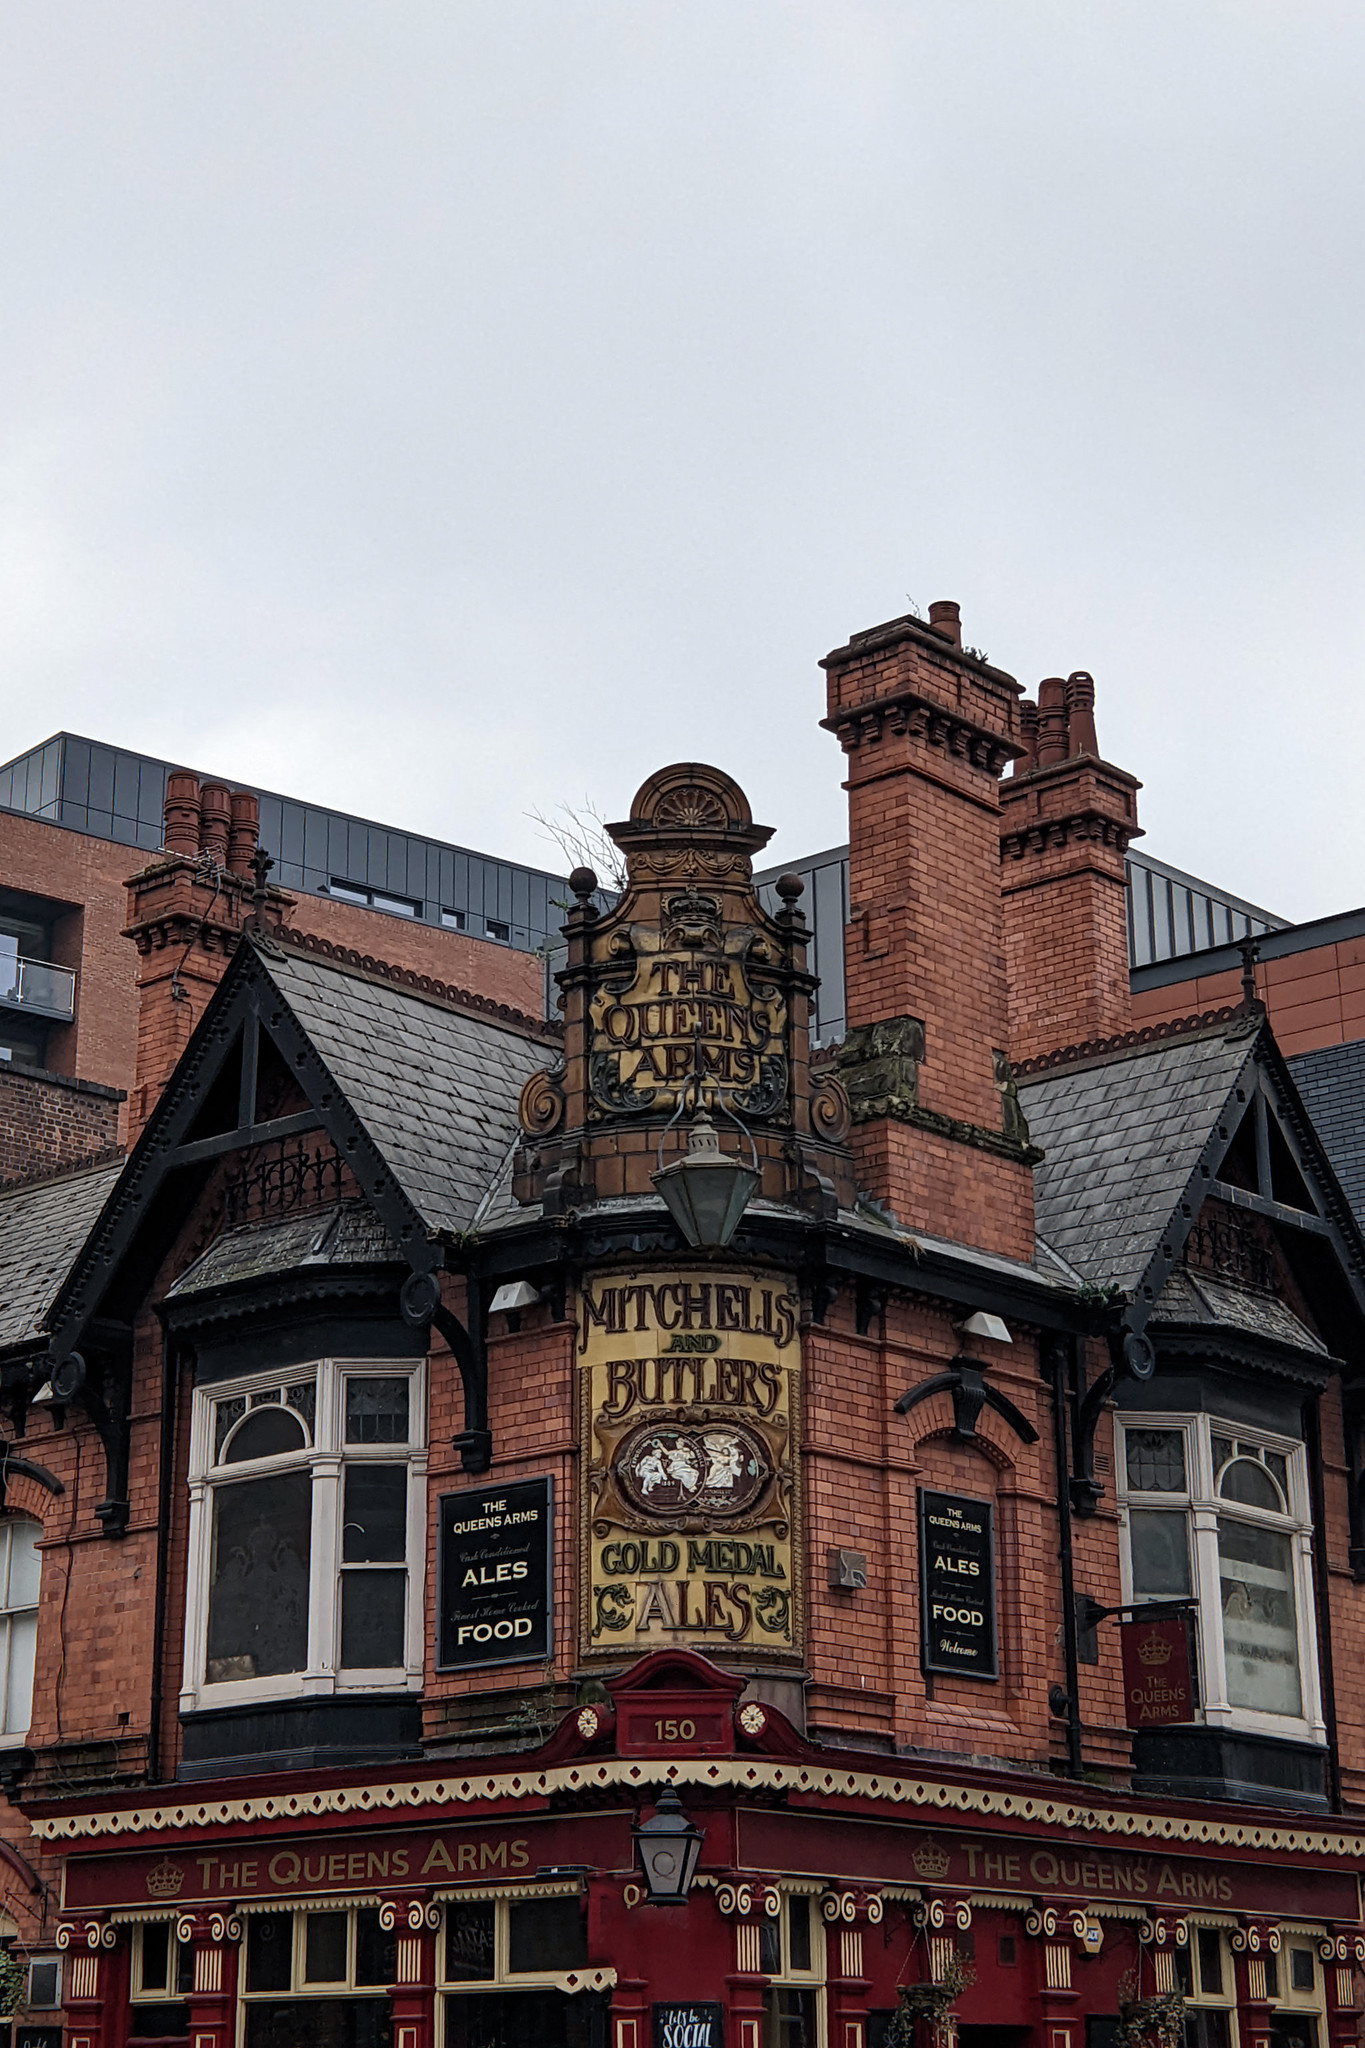 Our Guide to Birmingham's Jewellery Quarter